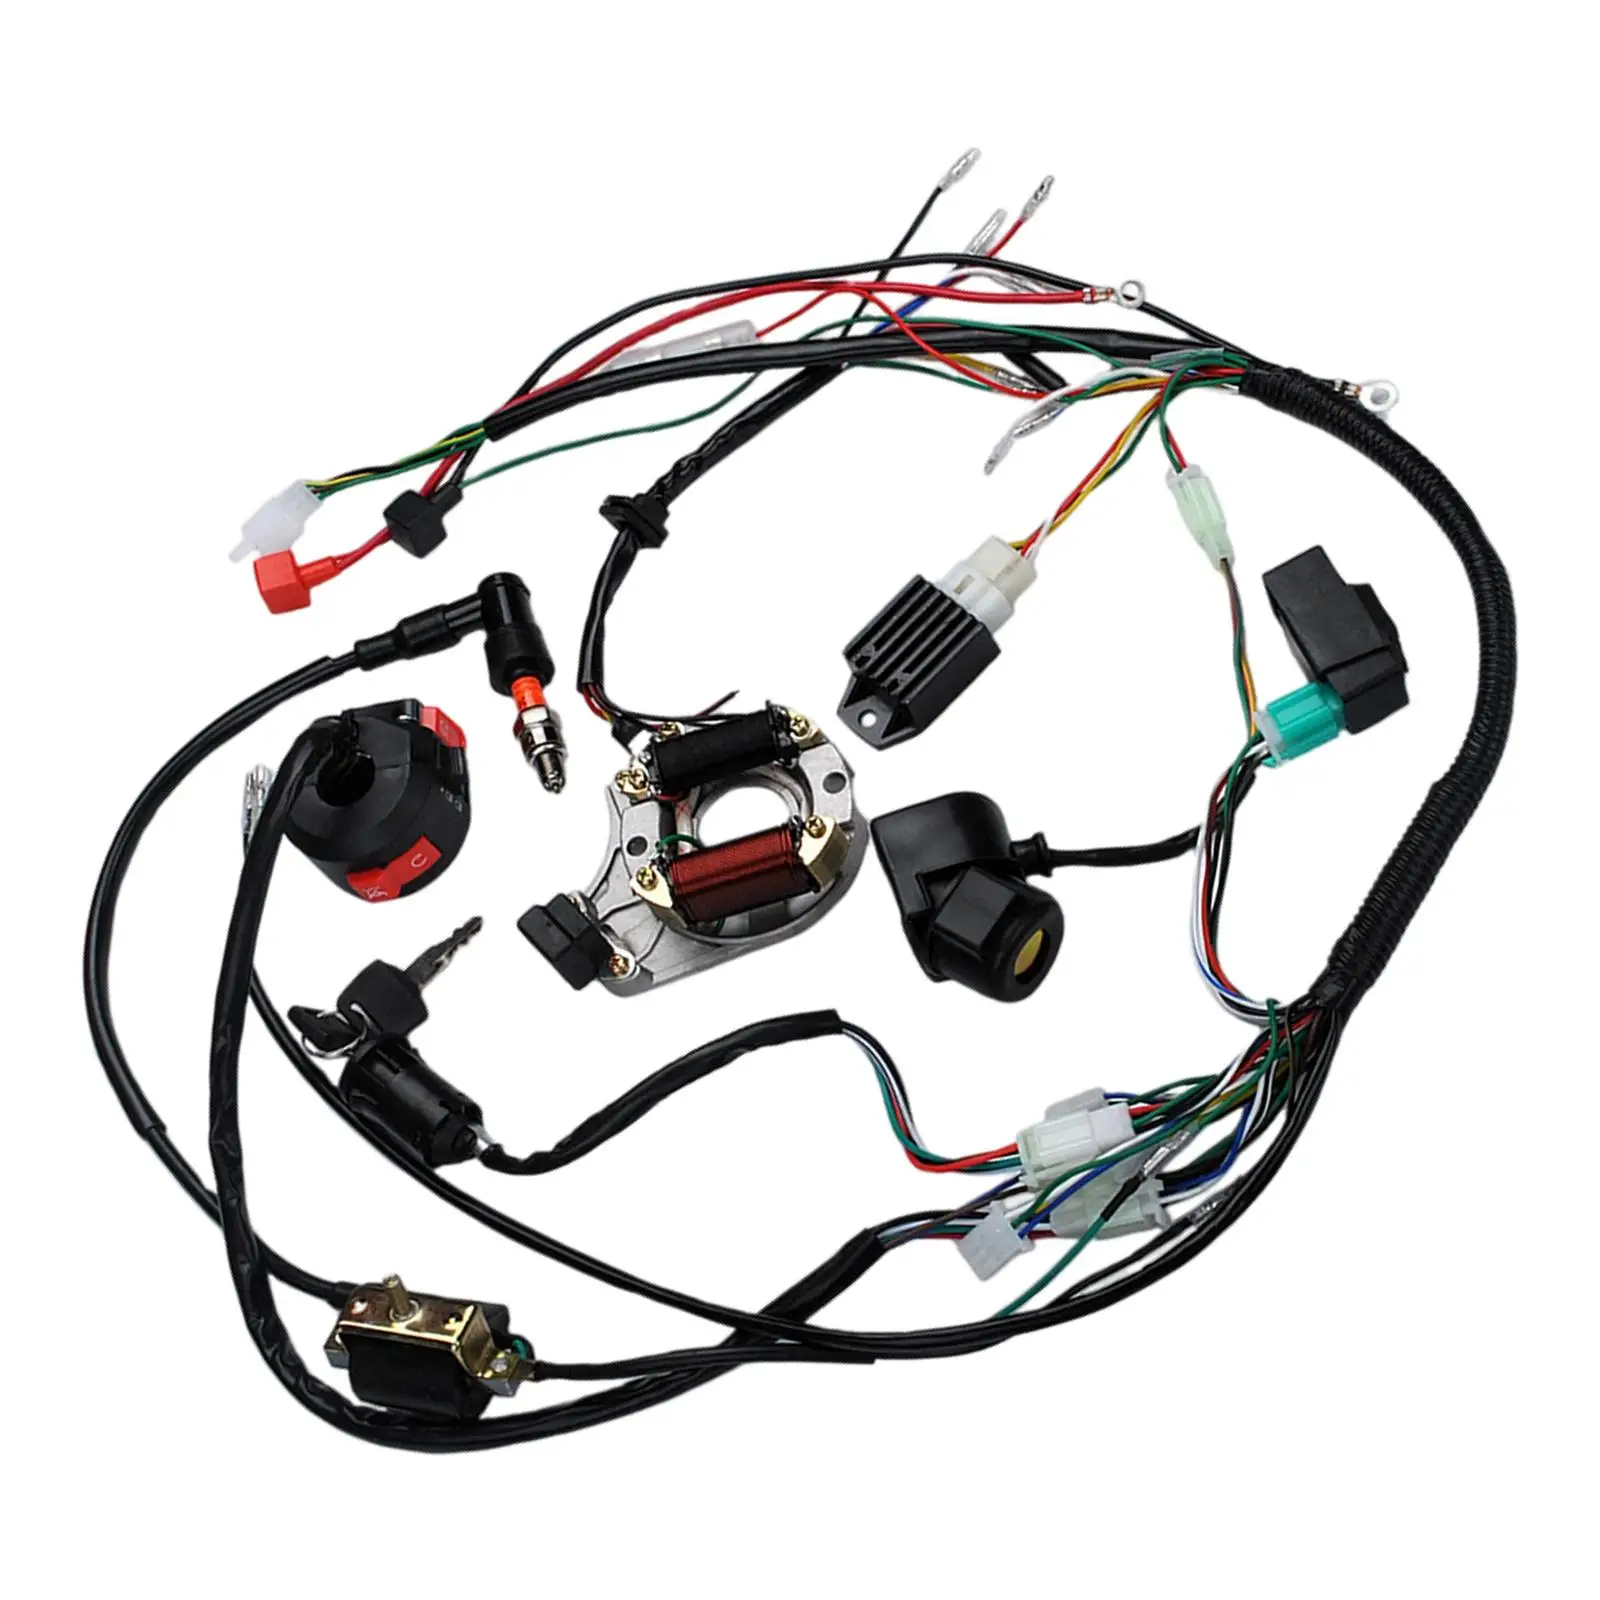 1Set Full  Electrics Wiring Harness Stator w/ Solenoid Relay Cdi Spark  for Motorcycle  ATV Buggy 50cc -125cc